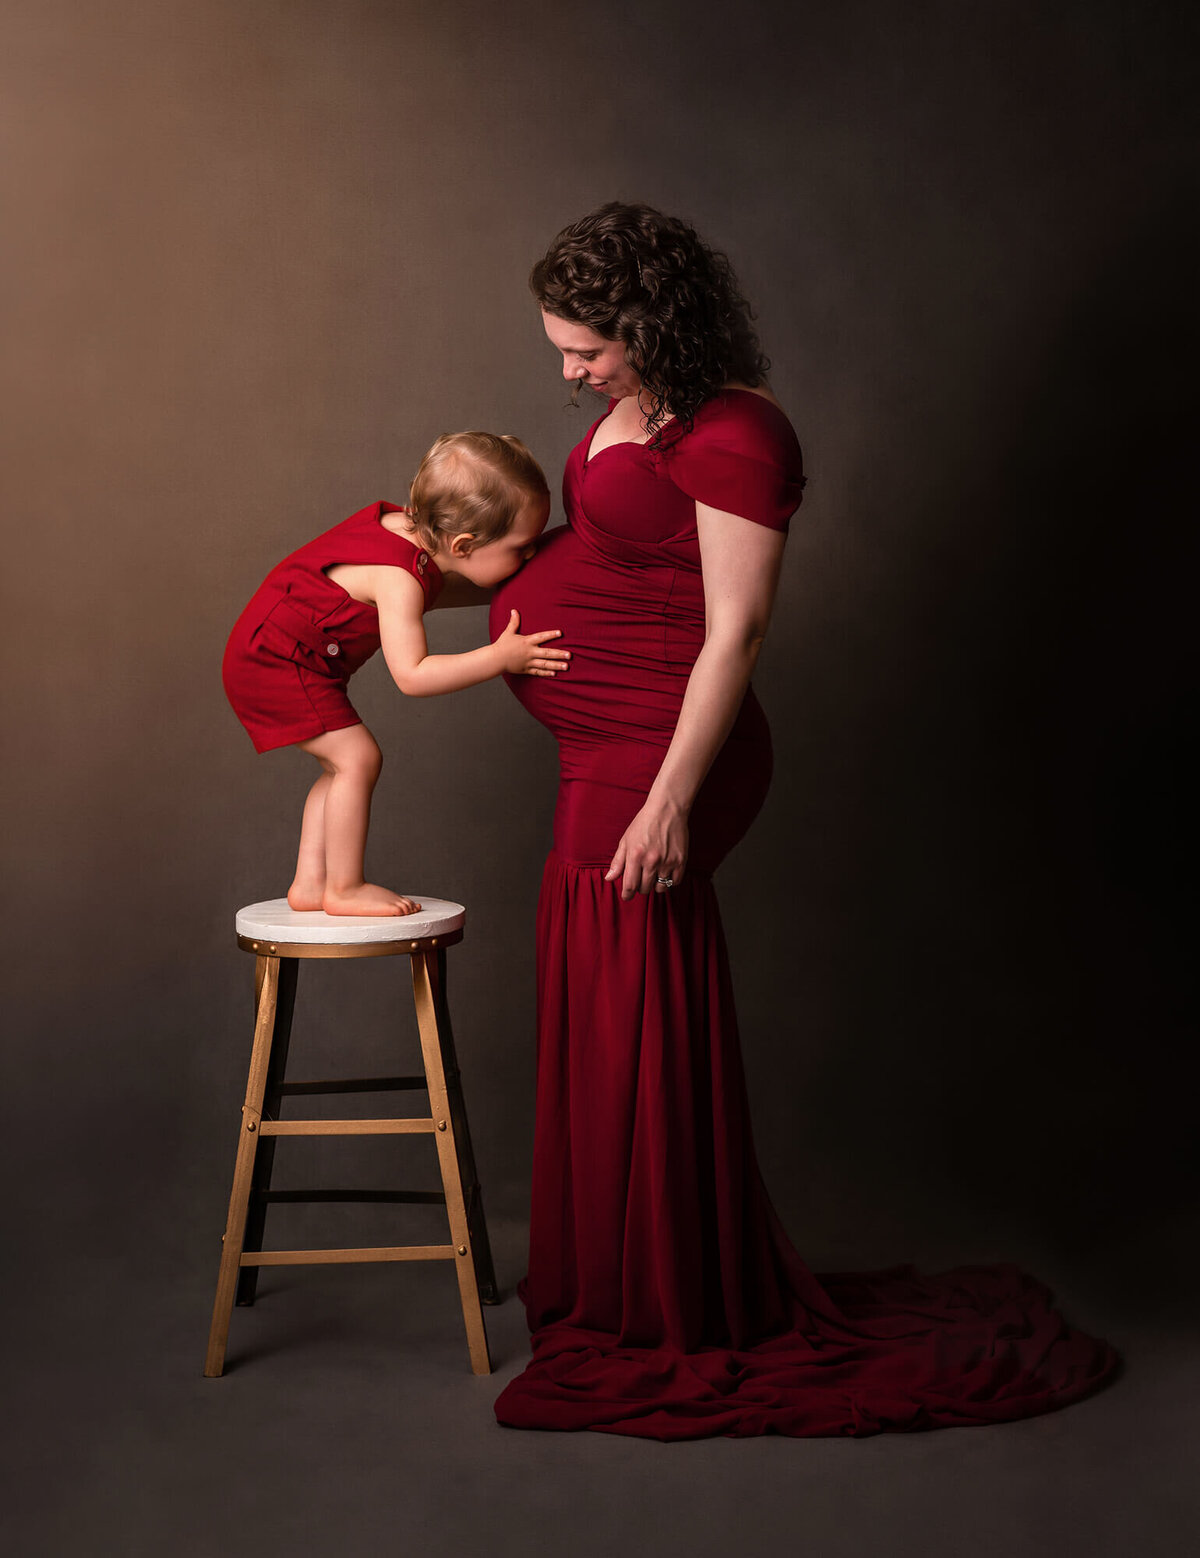 An Expecting mama in a long red dress  stands still as her son kisses her baby bump while standing on a stool